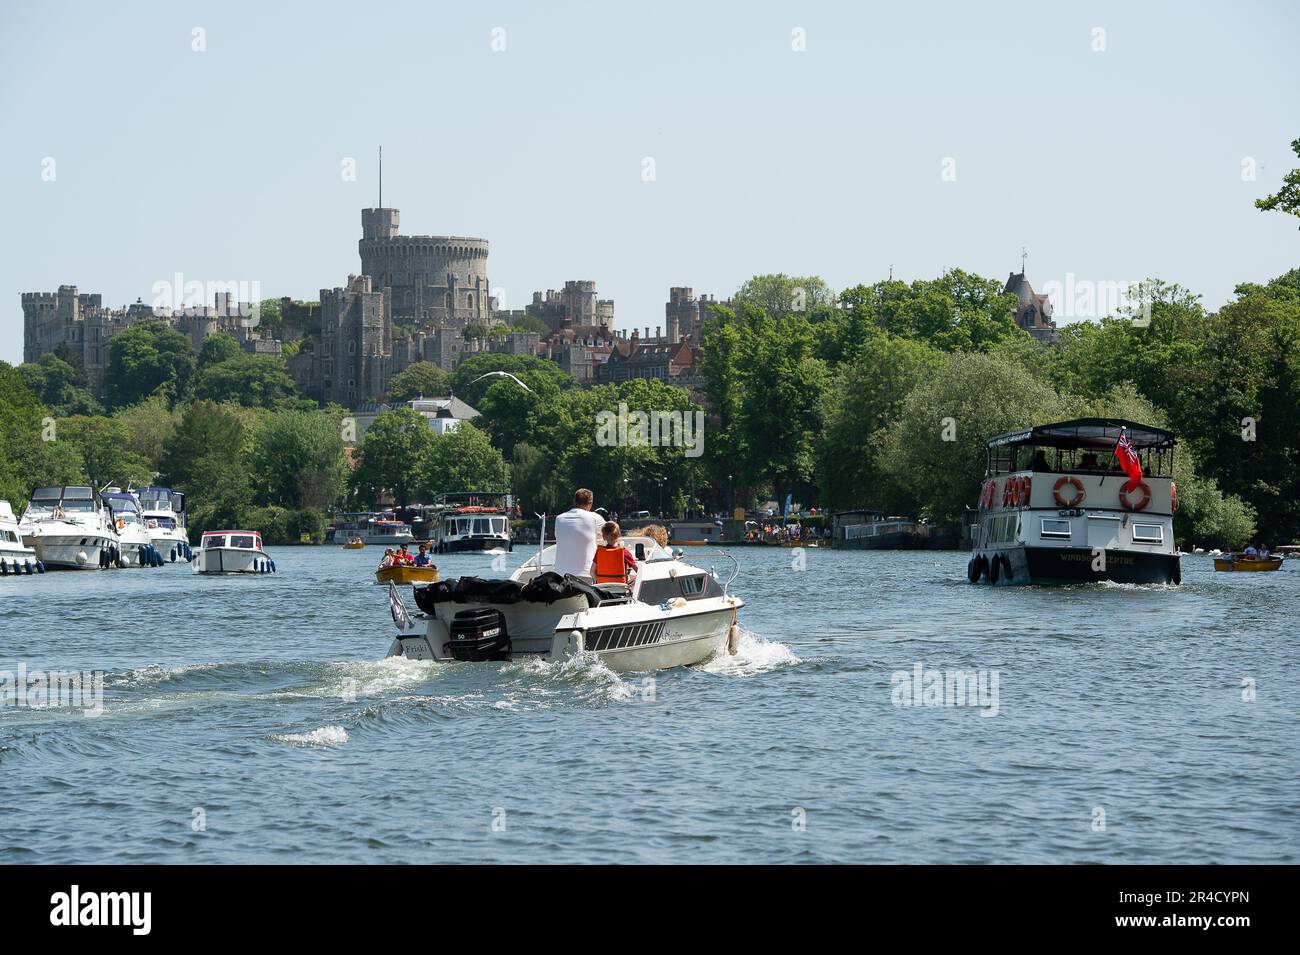 Windsor, Berkshire, UK. 27th May, 23. It was a beautiful warm and sunny day in Windsor Berkshire today as people flocked to the town for boat trips on the River Thames with the backdrop of the famous Windsor Castle. Credit: Maureen McLean/Alamy Live News Stock Photo